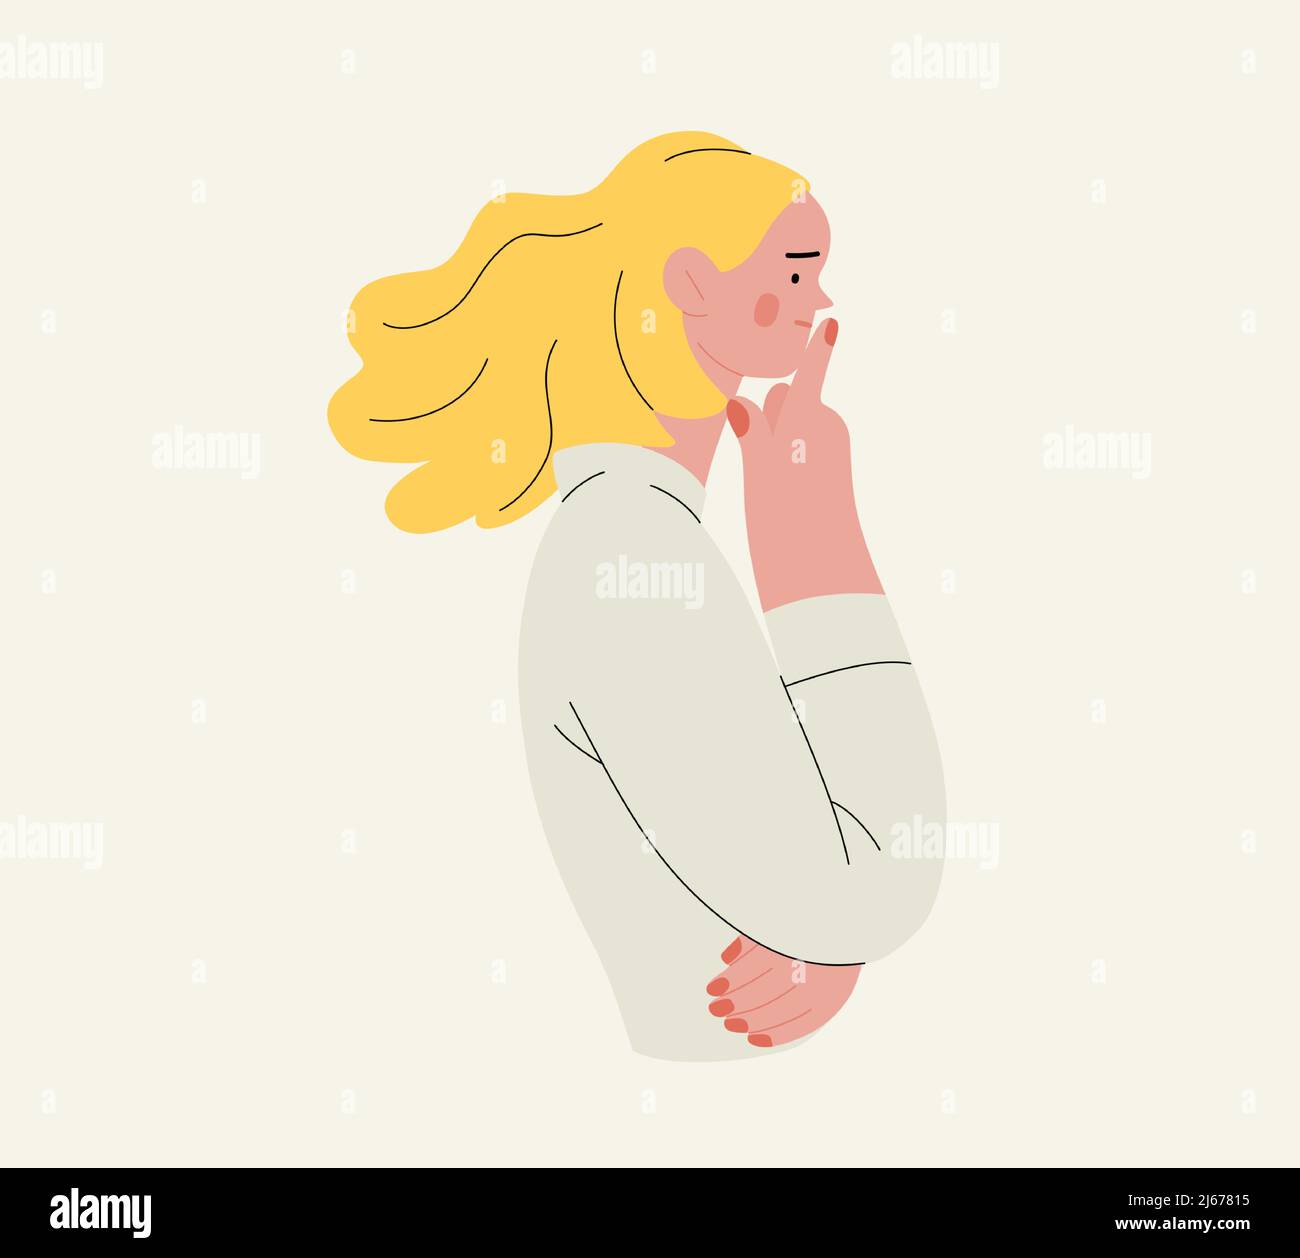 People portrait - Thinking people -Modern flat vector concept illustration of a young man thinking about something, half-length portrait, user avatar. Stock Vector